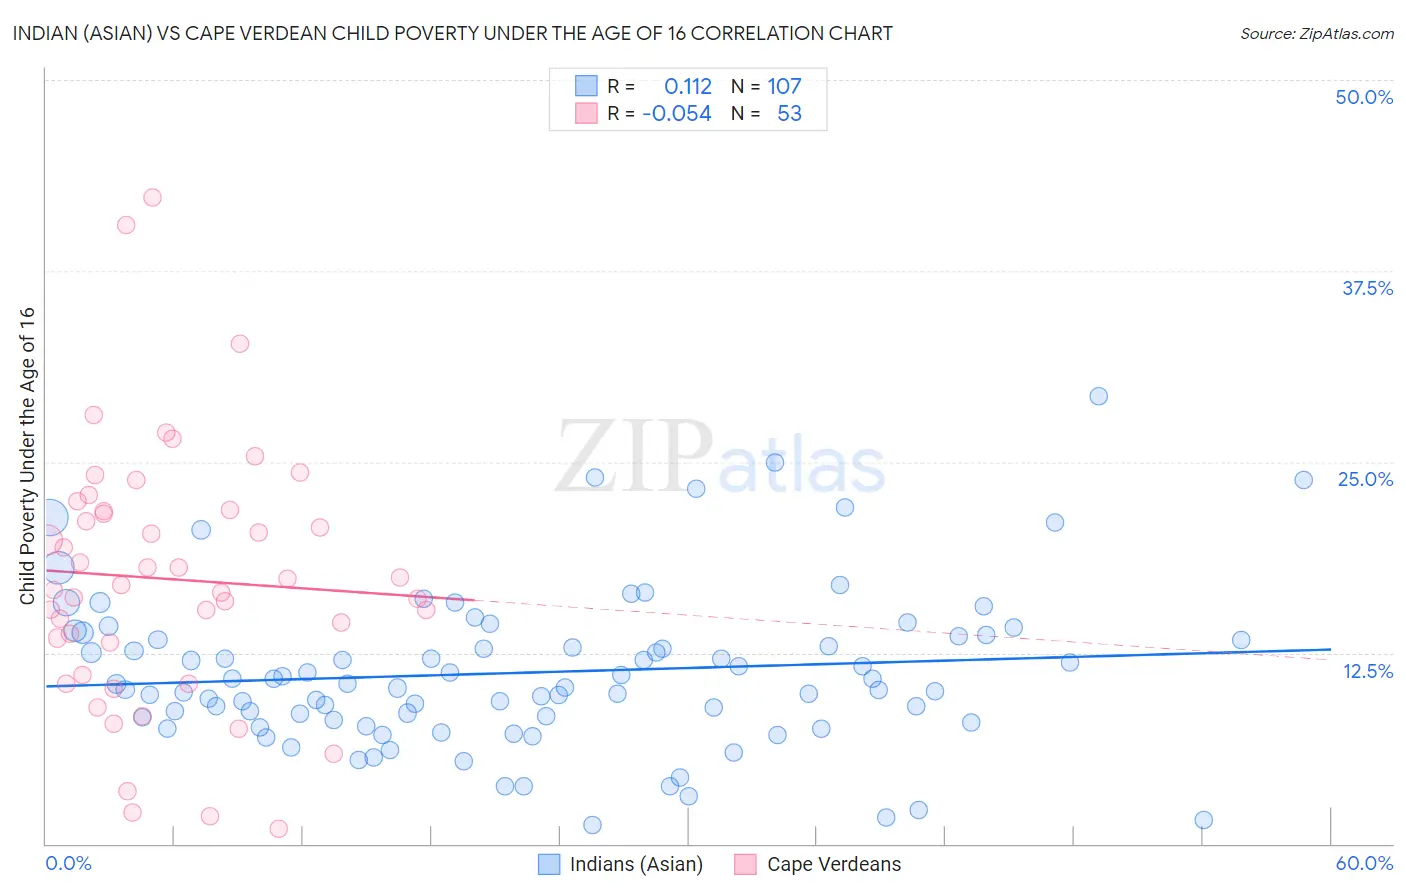 Indian (Asian) vs Cape Verdean Child Poverty Under the Age of 16